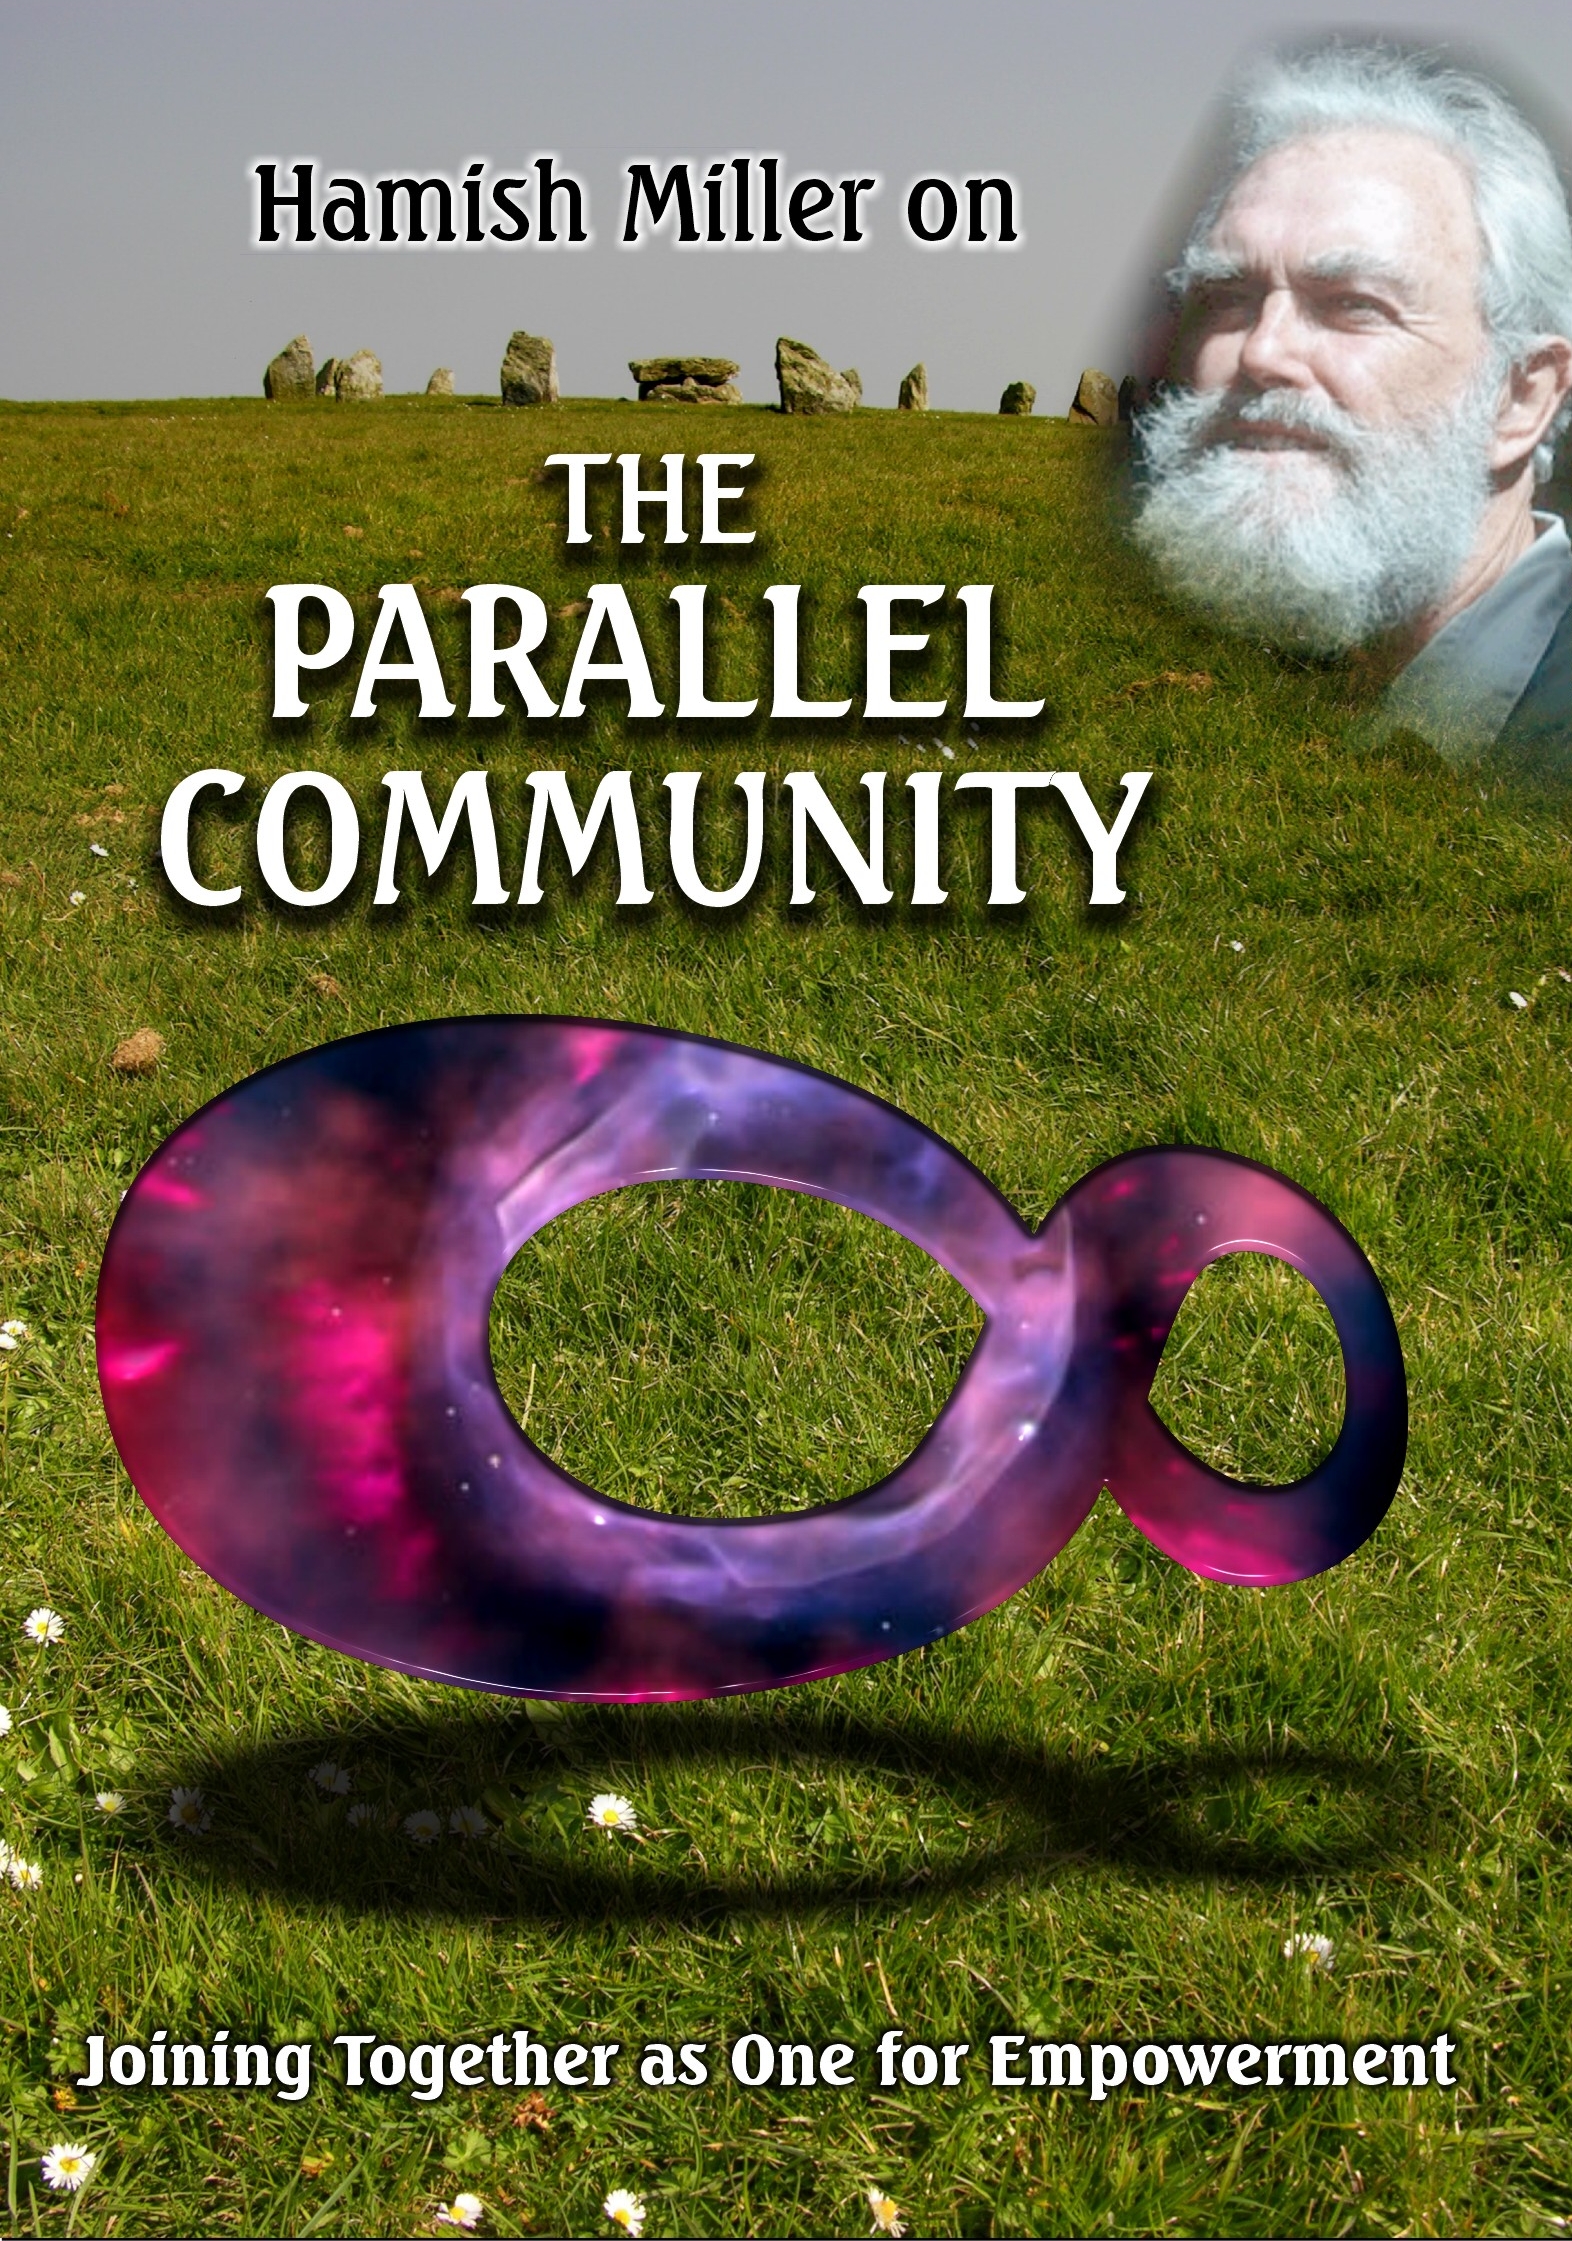 Hamish Miller in Hamish on the Parallel Community (2008)